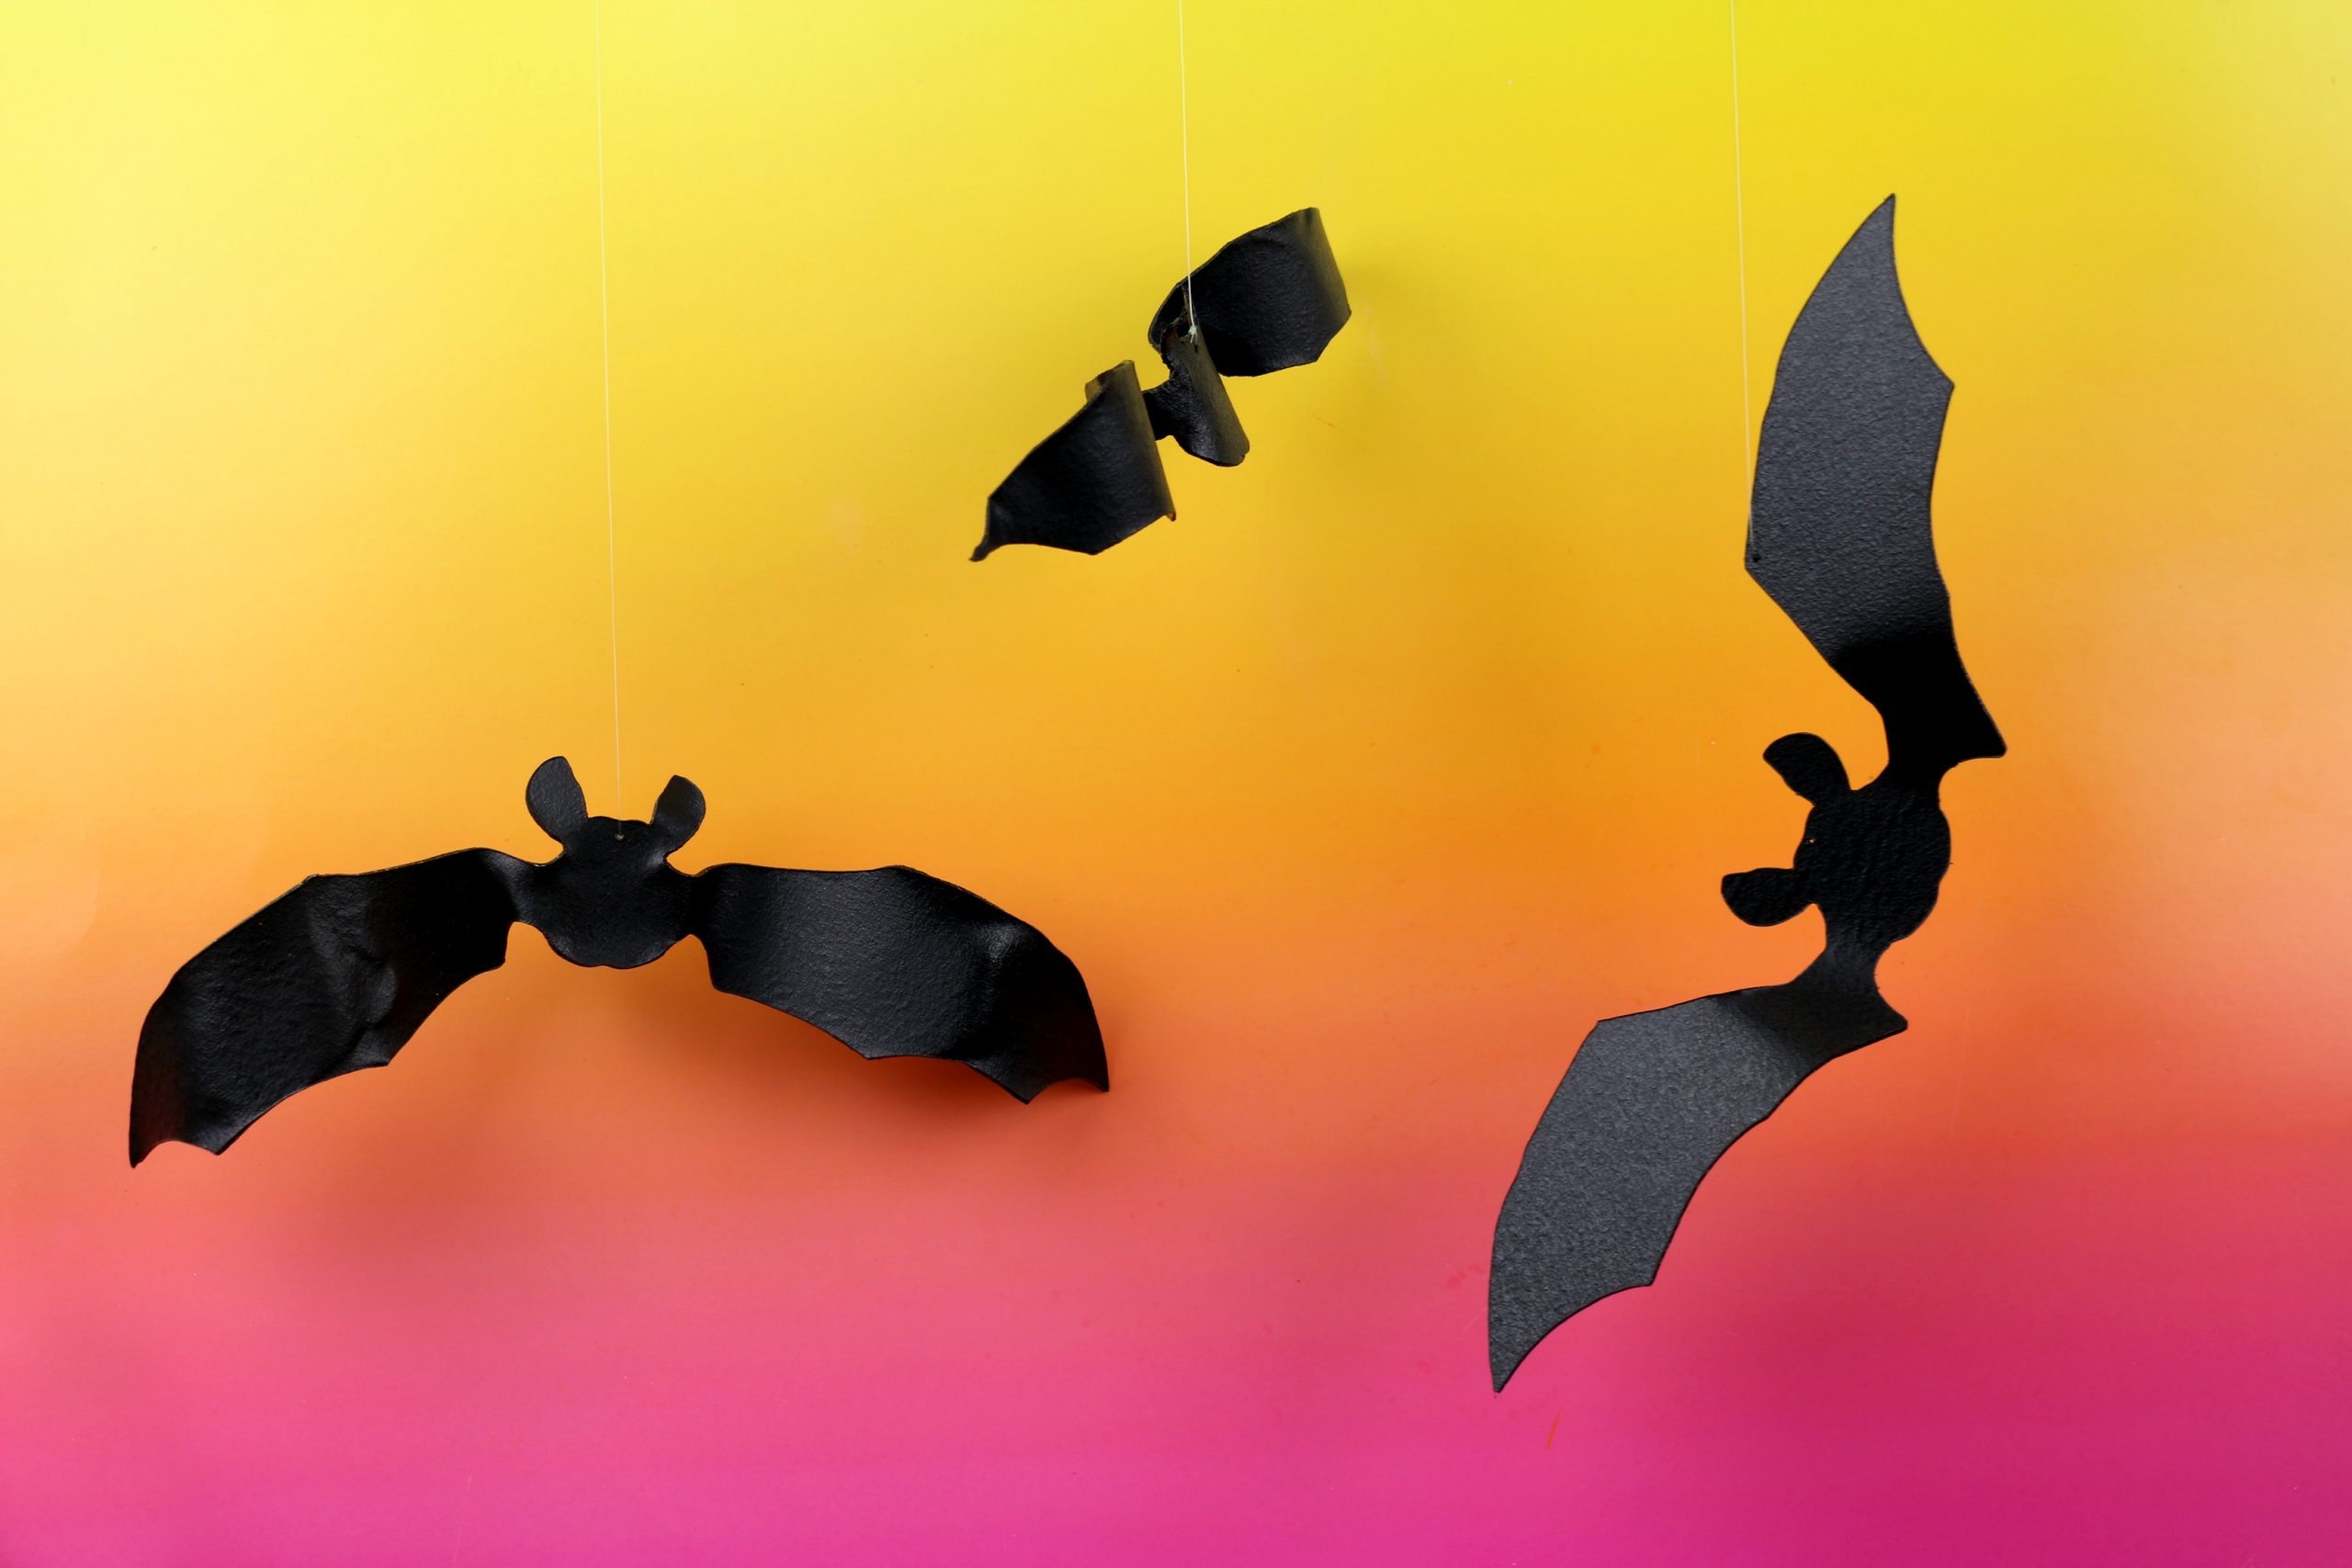 black bat shapes cut out of worbla plastic on pink and orange background